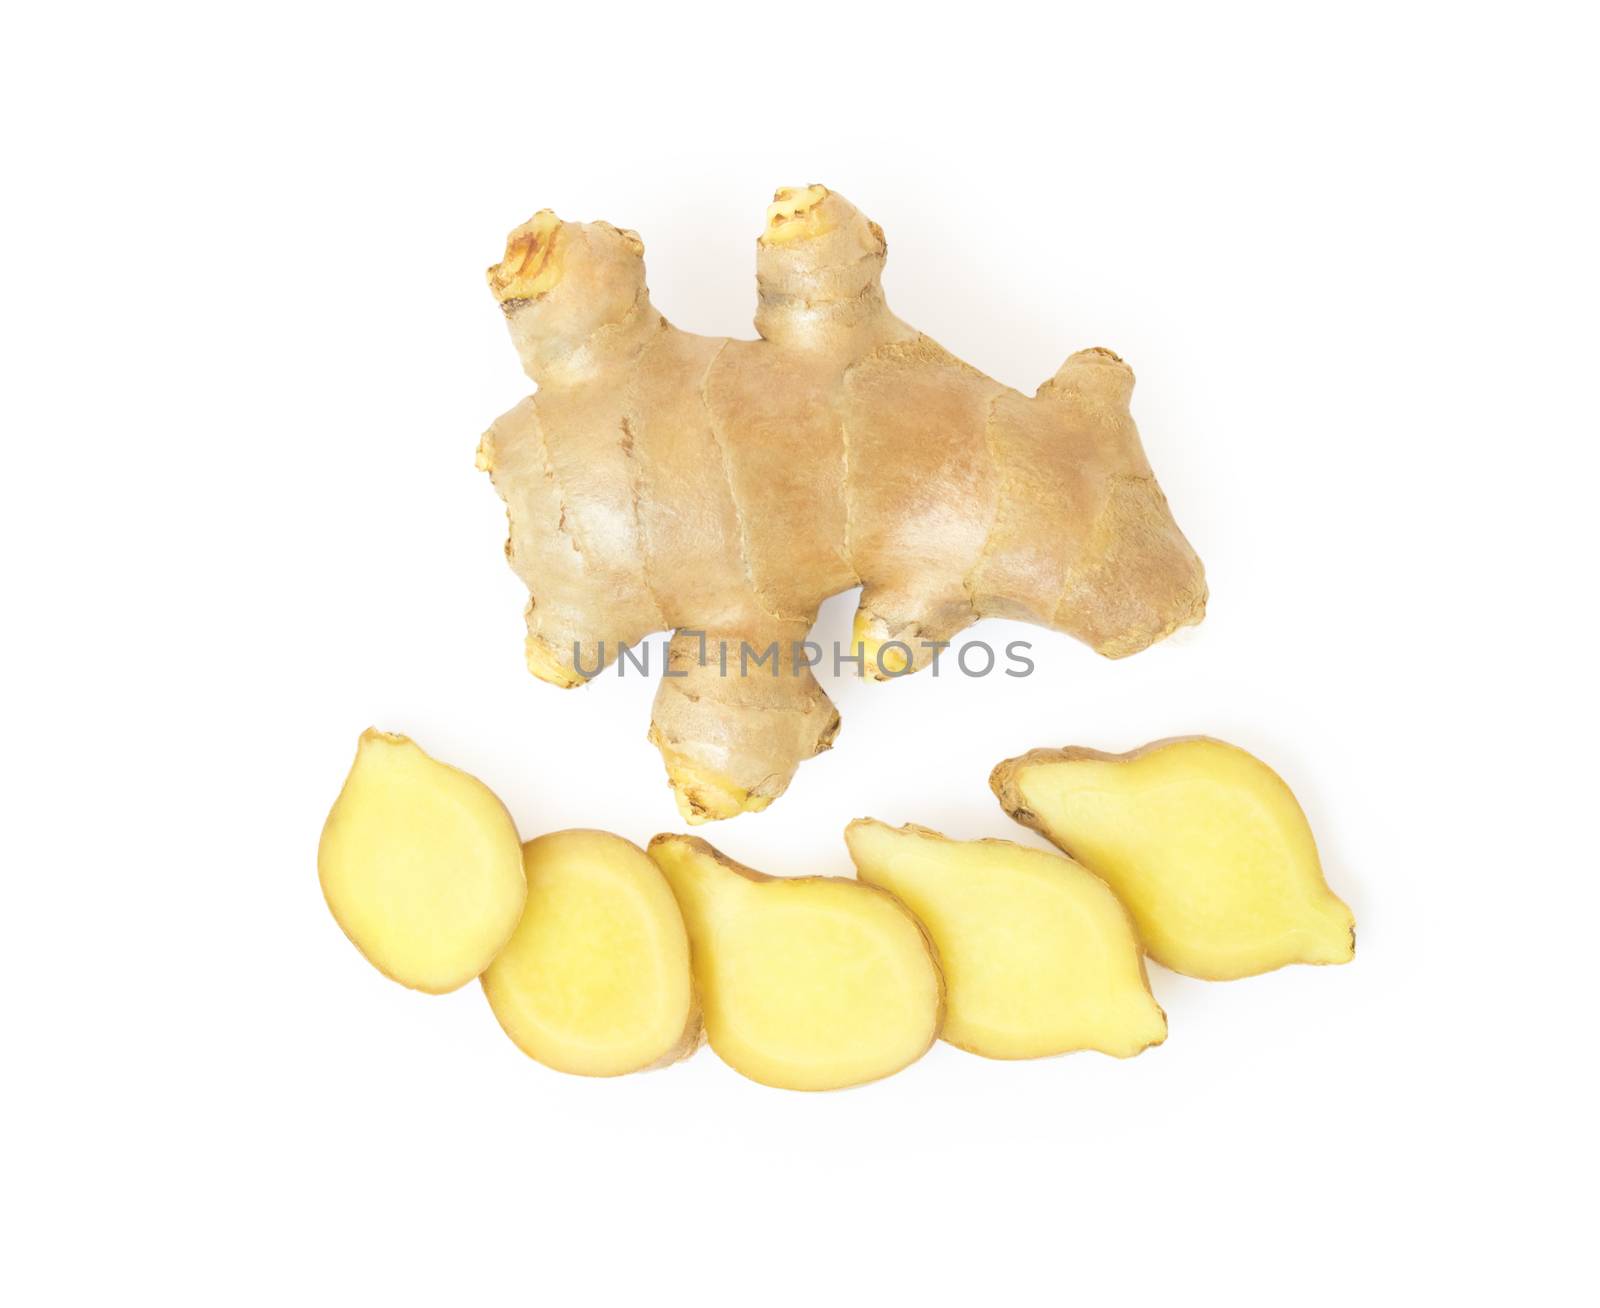 Fresh ginger isolated on white background with clipping path